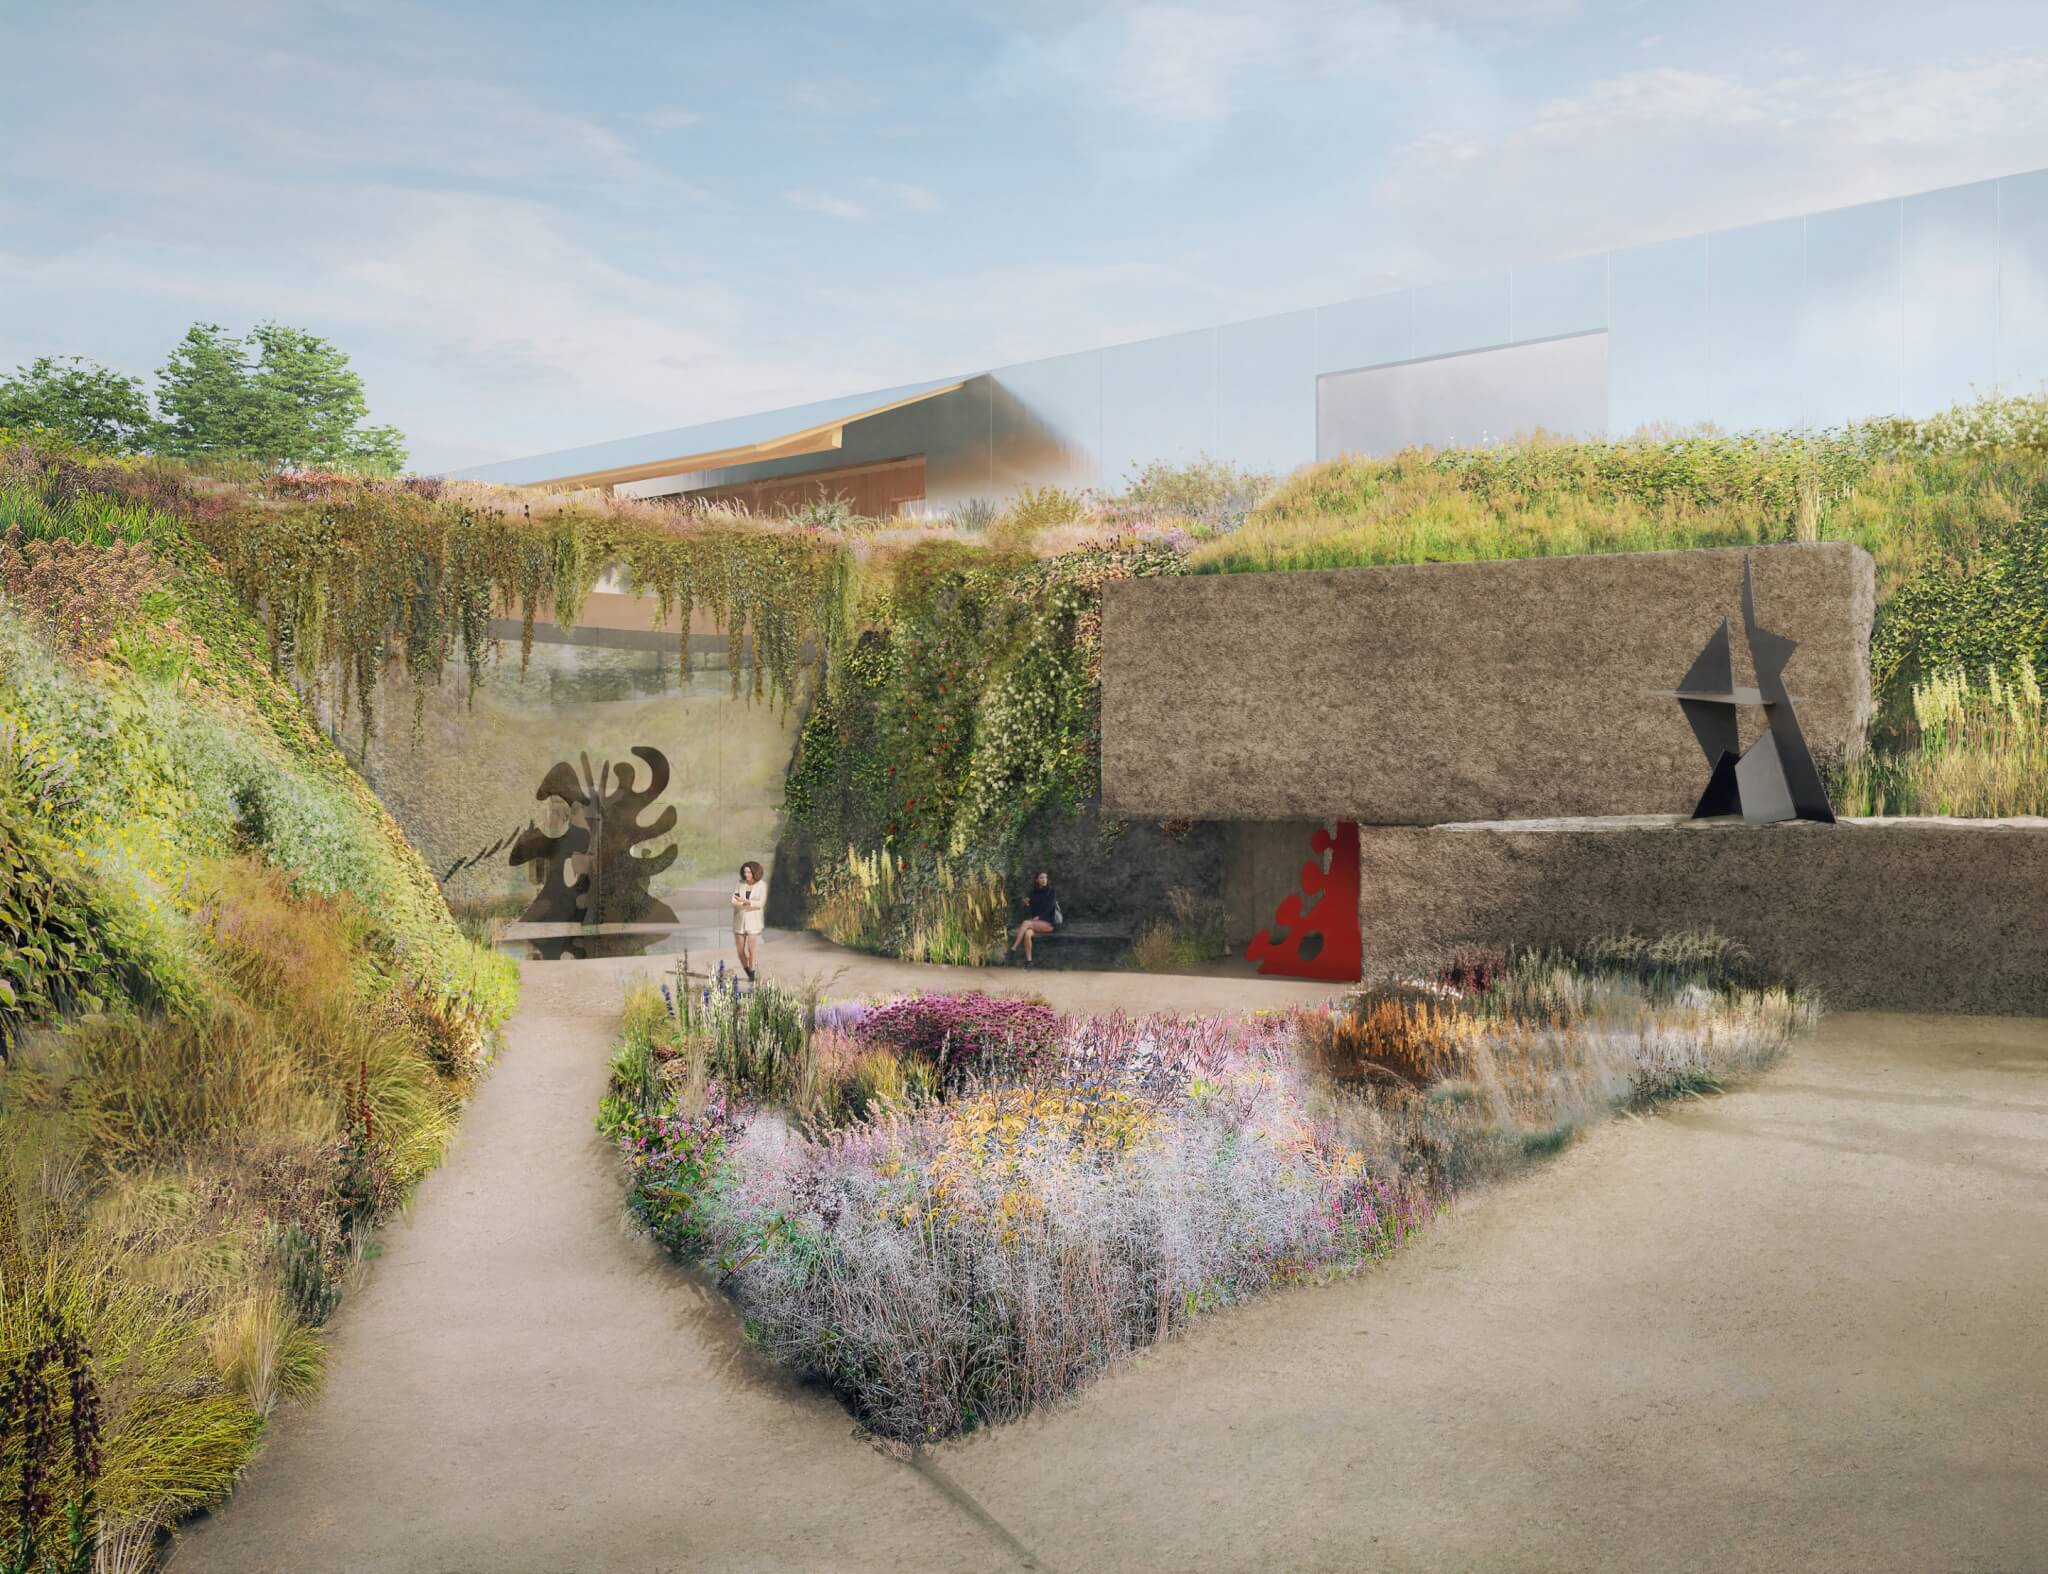 rendering of a lush, naturalistic garden with sculptures